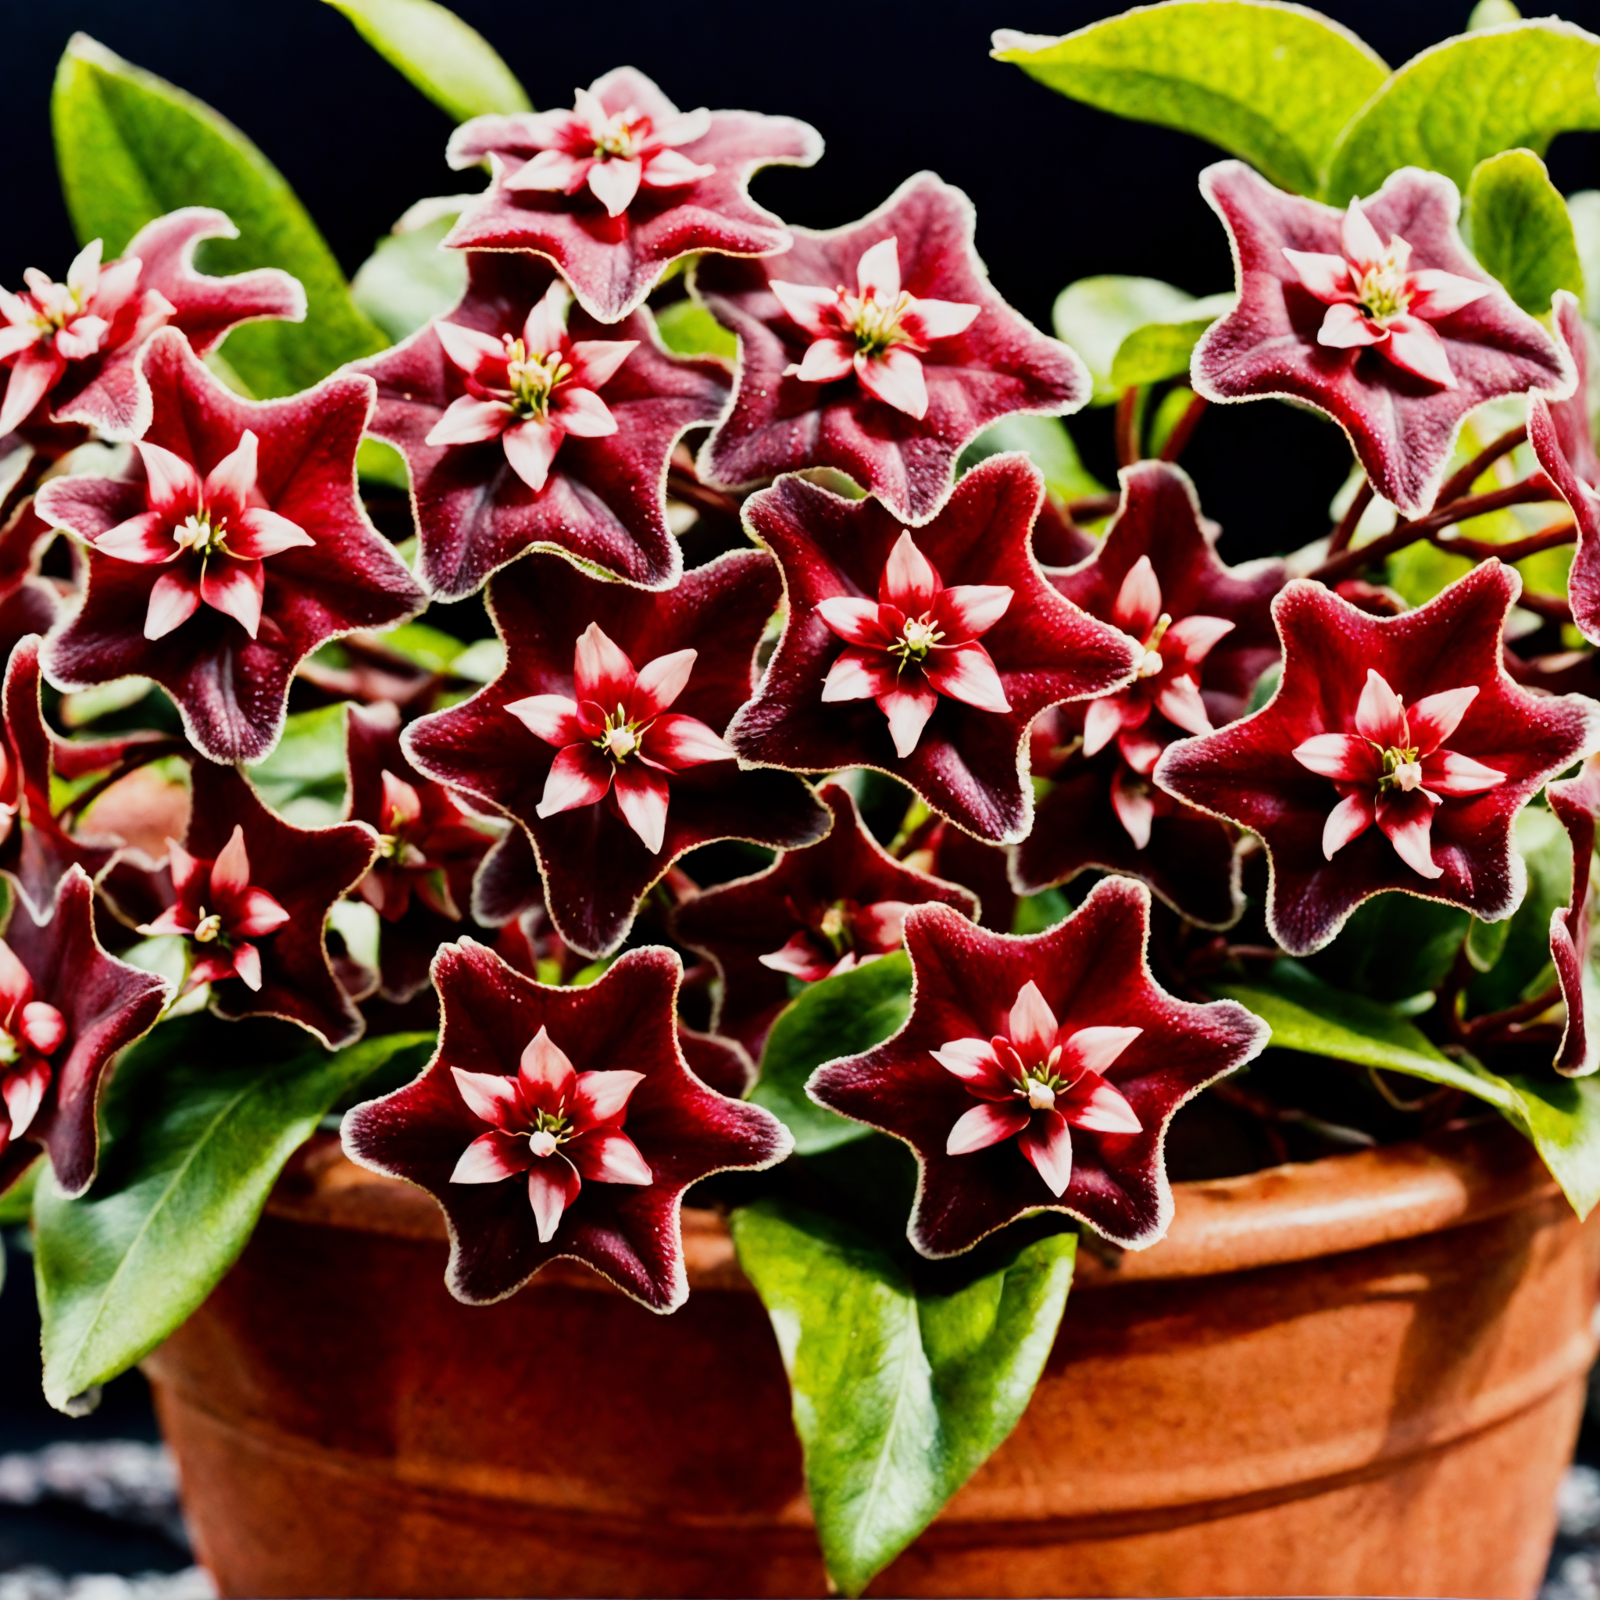 Hoya pubicalyx with red and white blooms in a brown planter, clear indoor lighting, against a dark background.